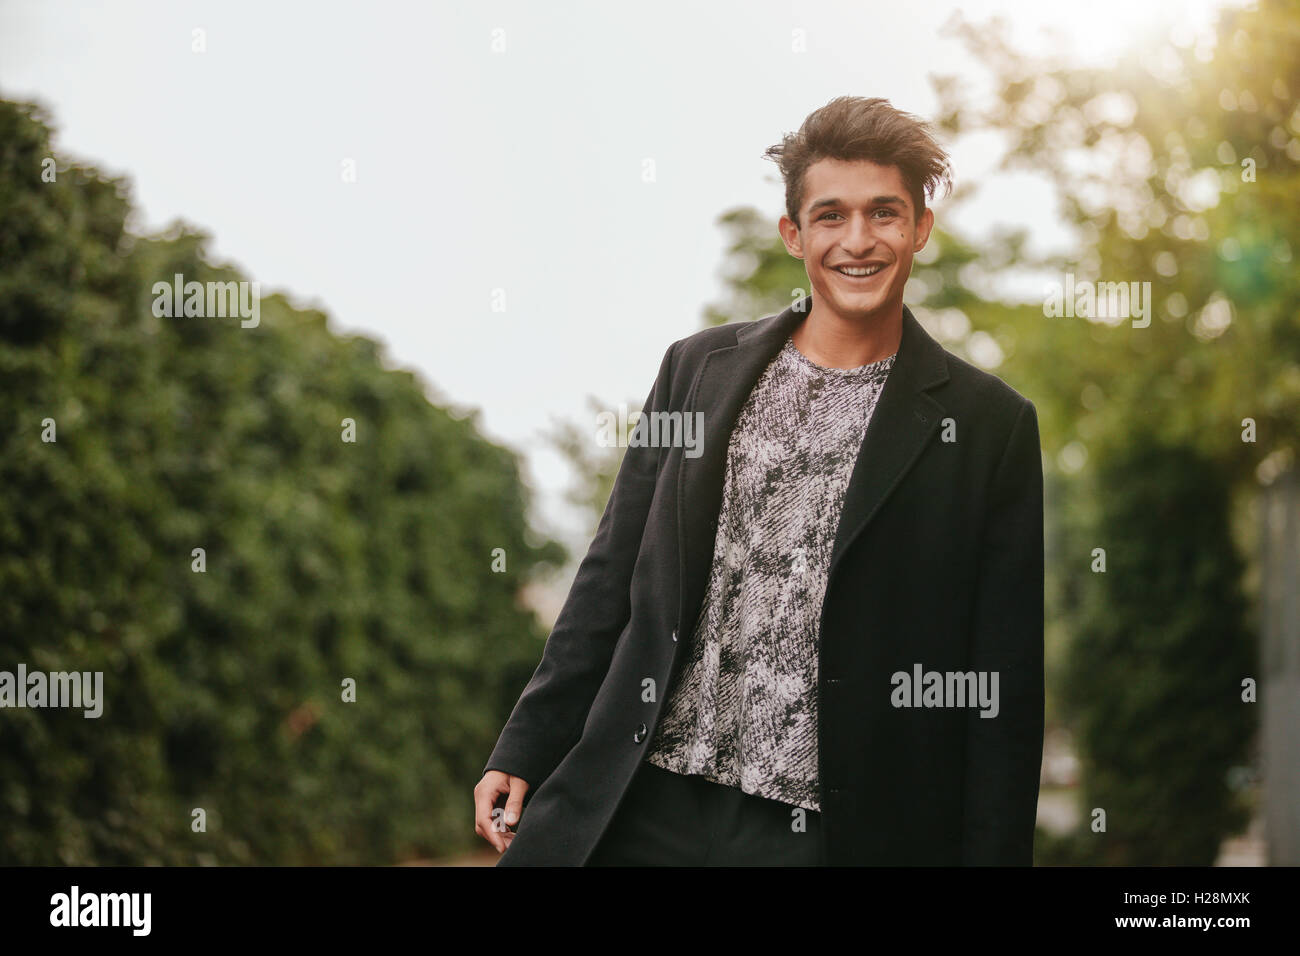 Portrait of handsome young man standing outdoors looking at camera and smiling. Teenage guy in casuals looking happy. Stock Photo